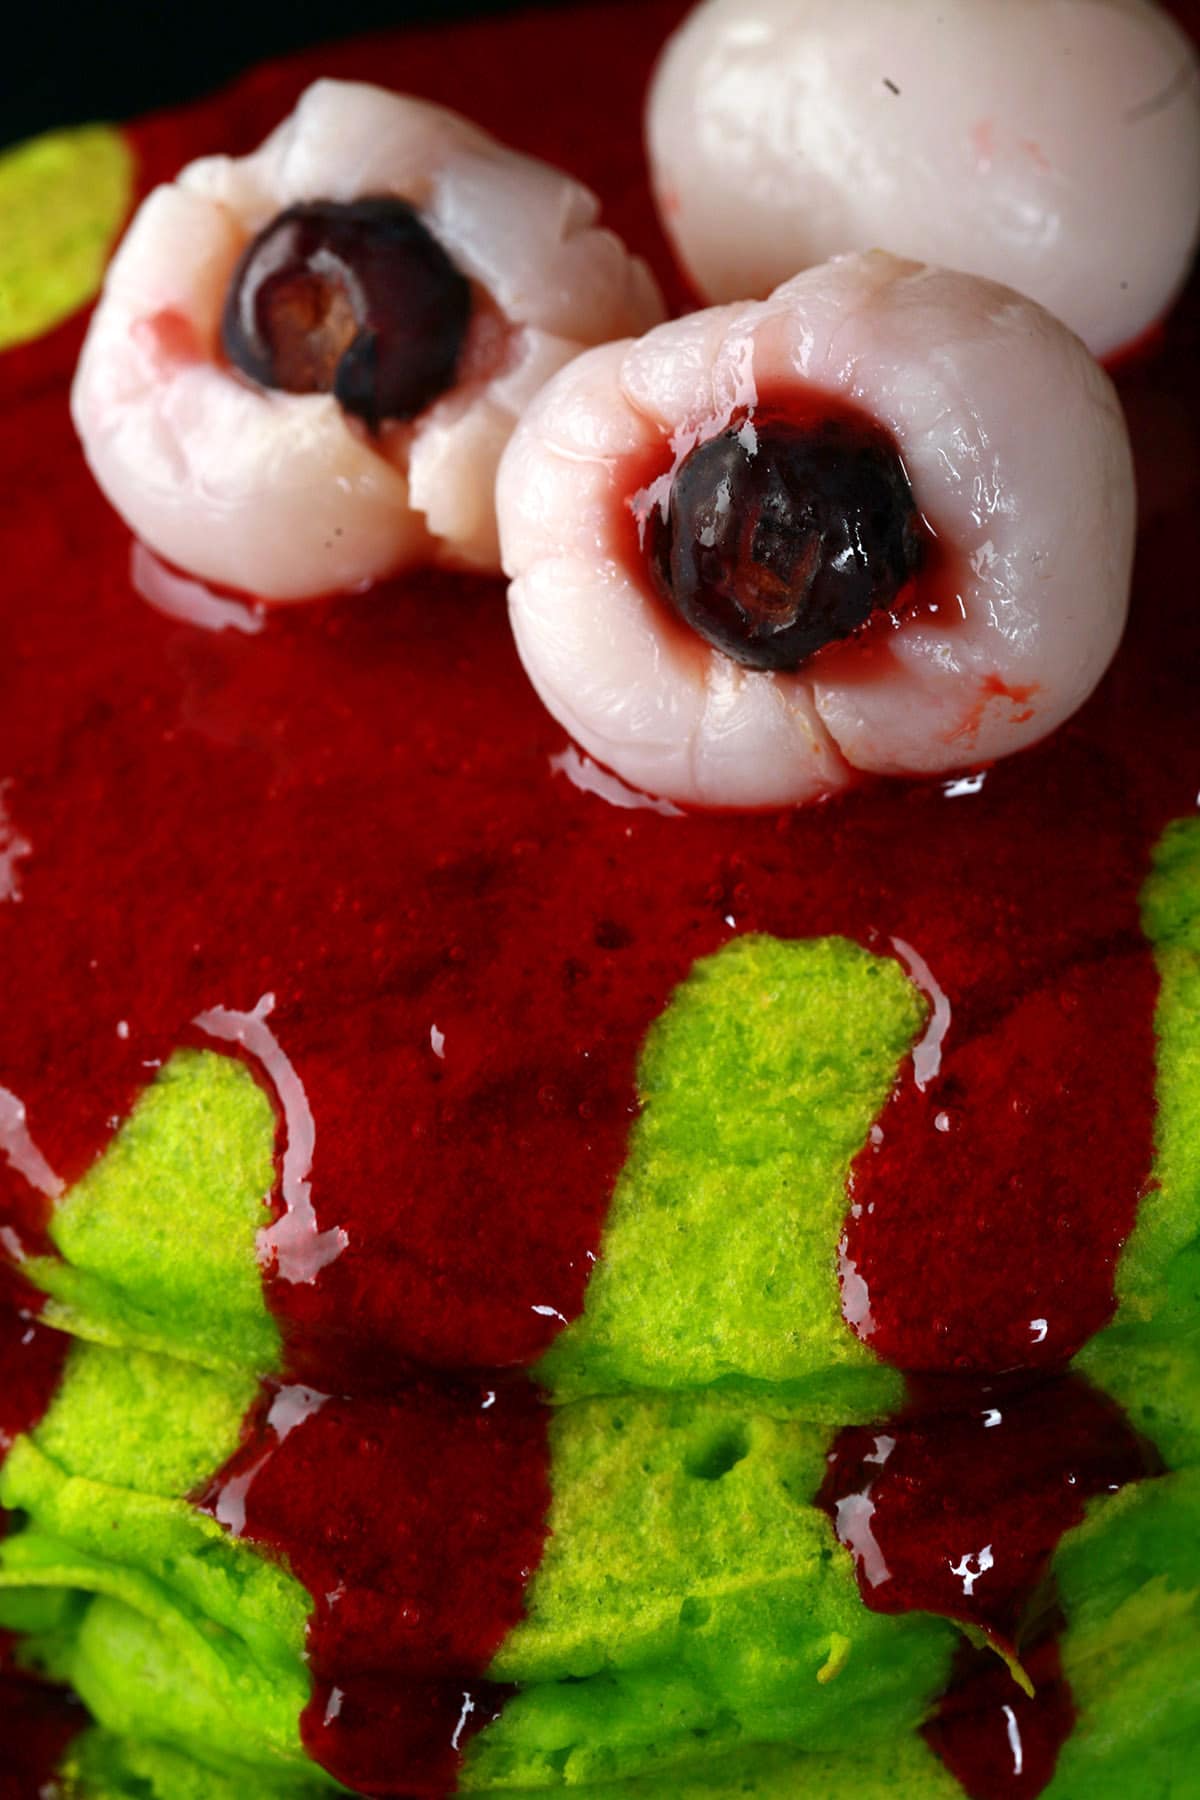 A stack of neon green bloody eyeball pancakes, with red syrup.